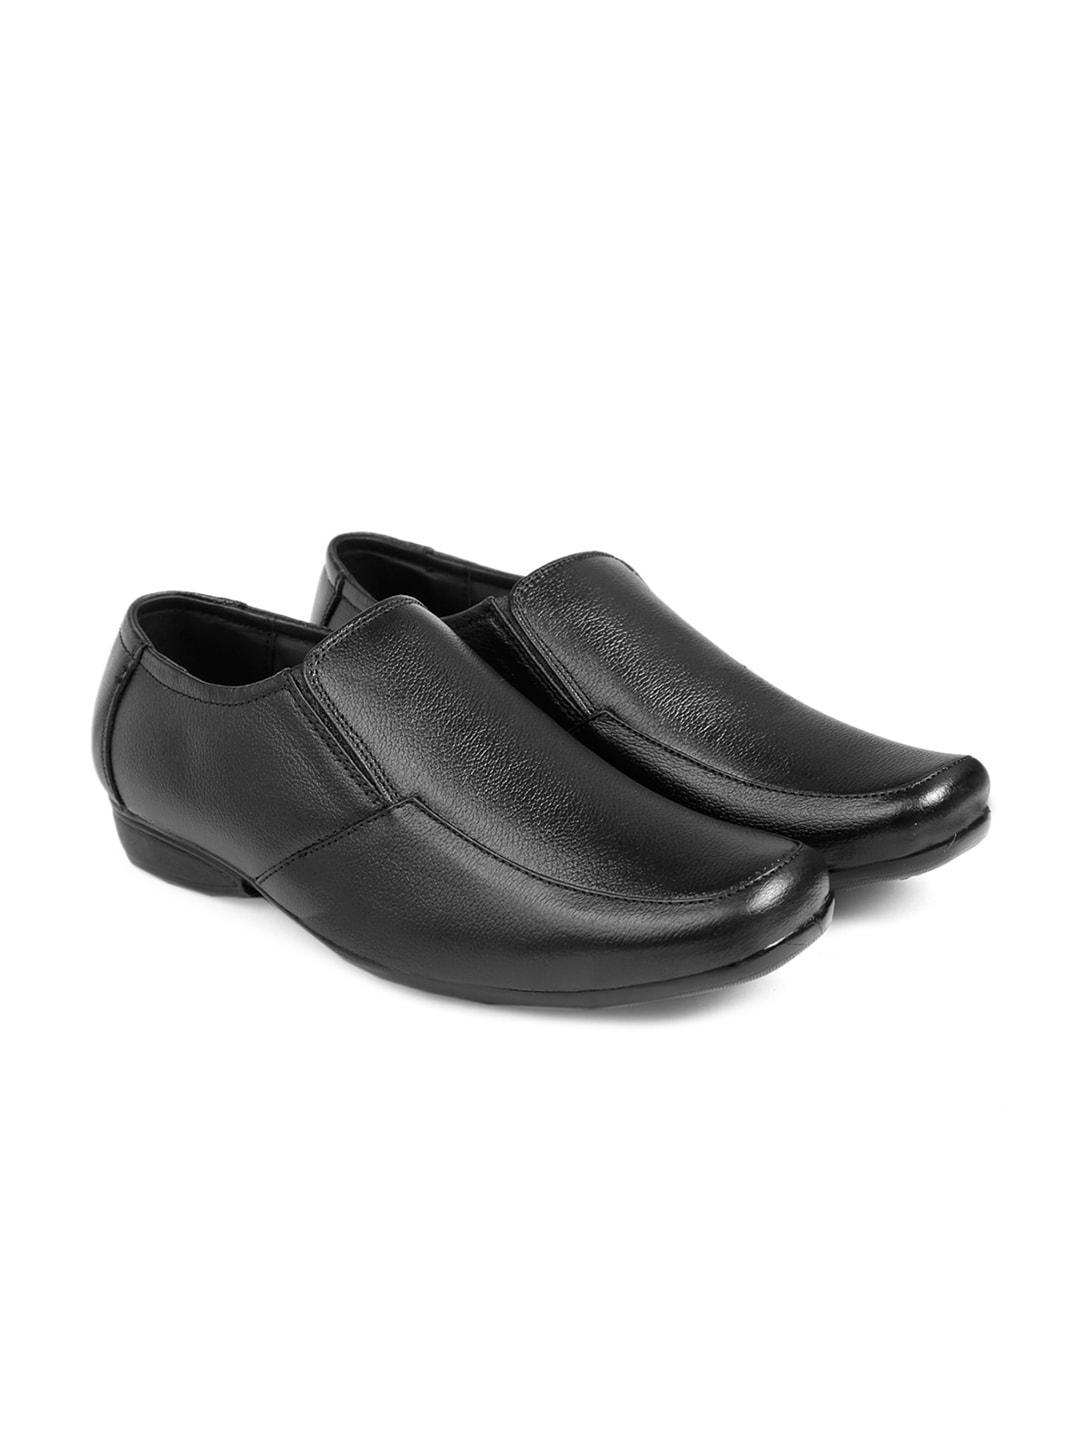 bxxy men textured leather formal slip-on shoes